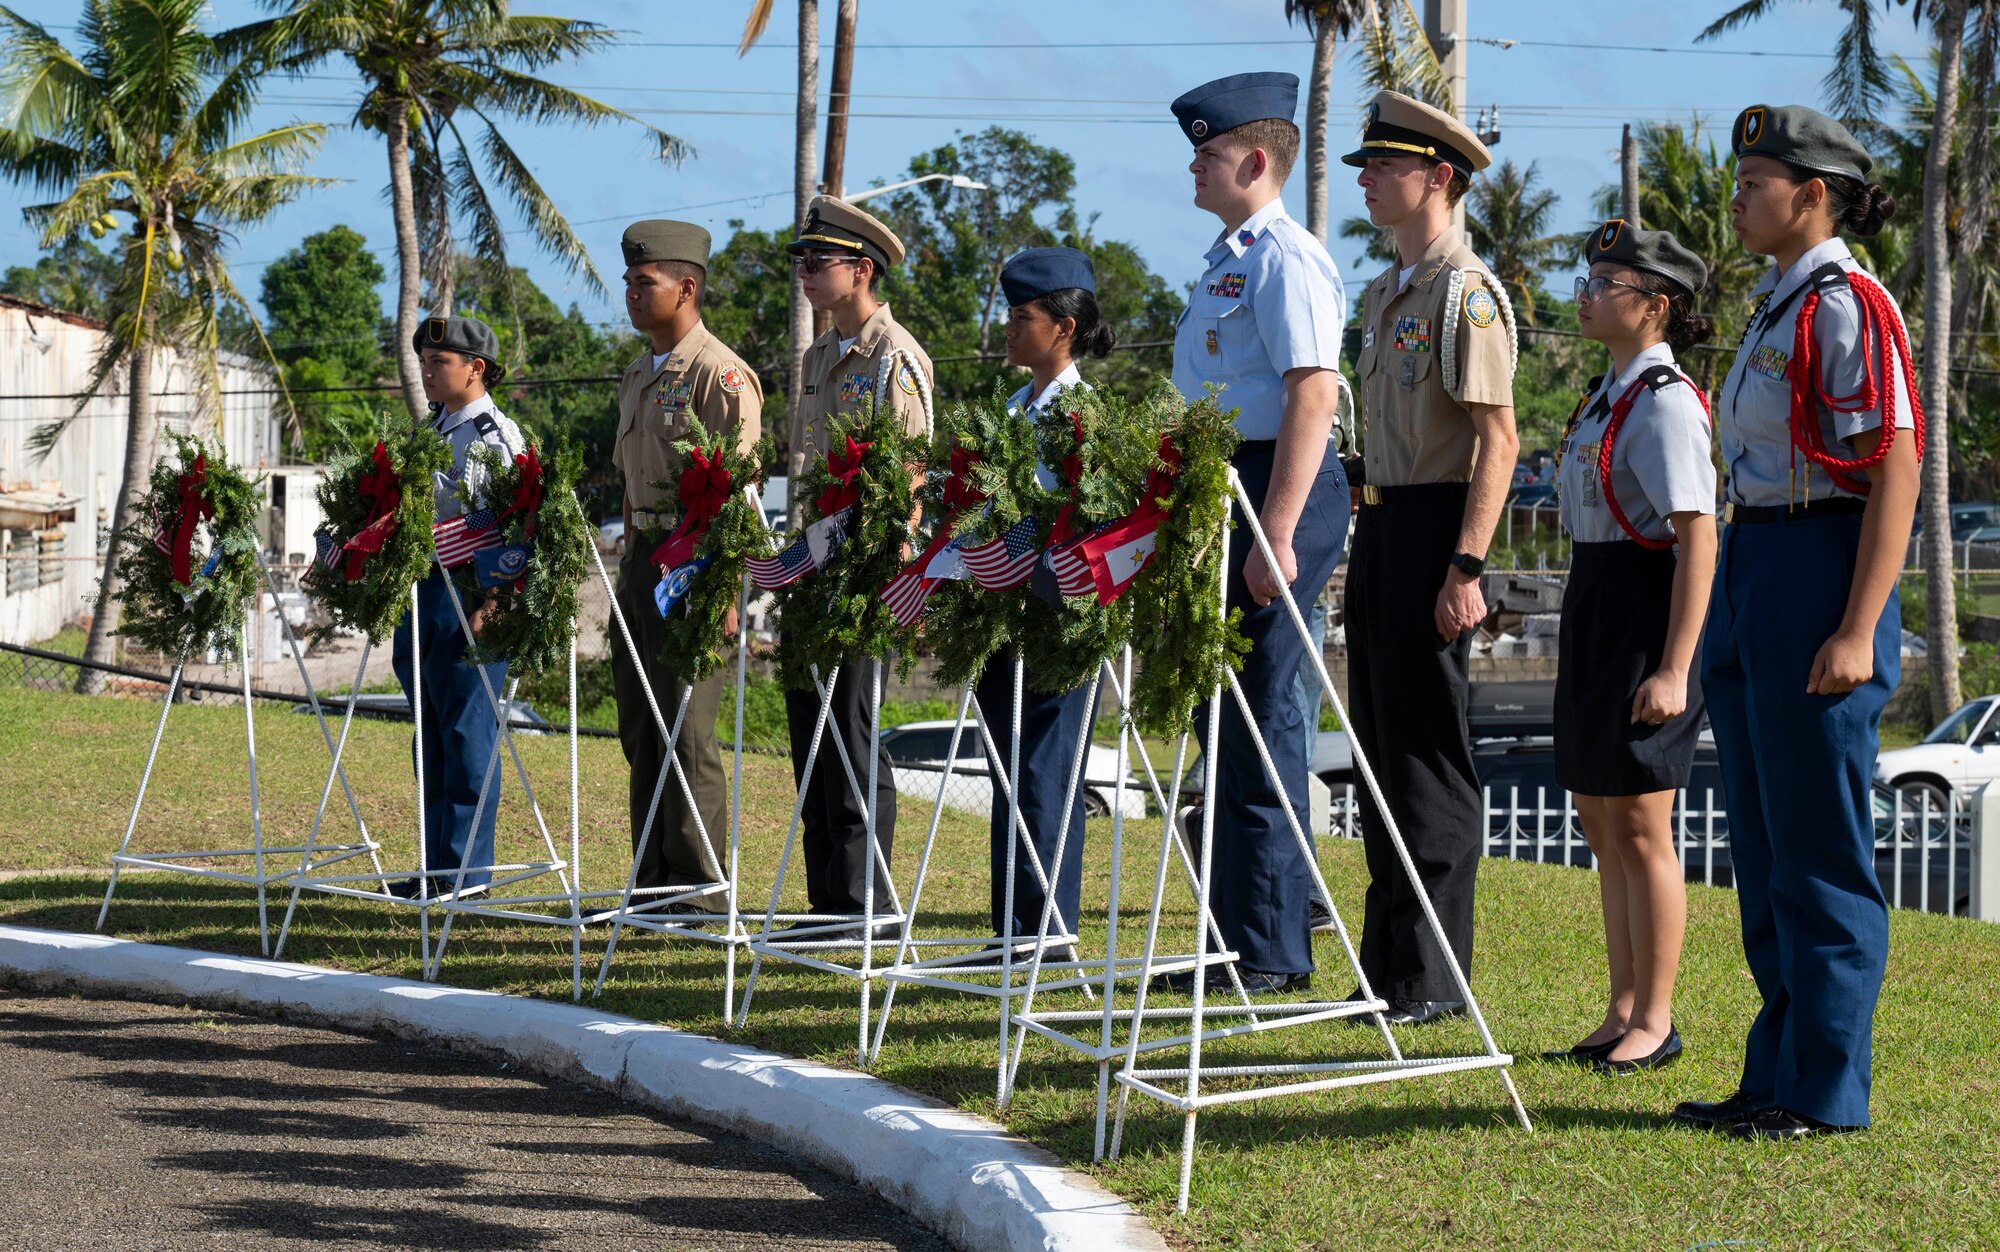 Junior reserve officer training corps members stand behind placed wreaths during the Wreaths Across America ceremony at the Guam Veterans Cemetery, Guam, Dec. 16, 2023. The Wreaths Across America program allows families to honor and remember the sacrifices of our military Veterans by placing wreaths on their graves during the holiday season. (U.S. Air Force photo by Airman 1st Class Spencer Perkins)